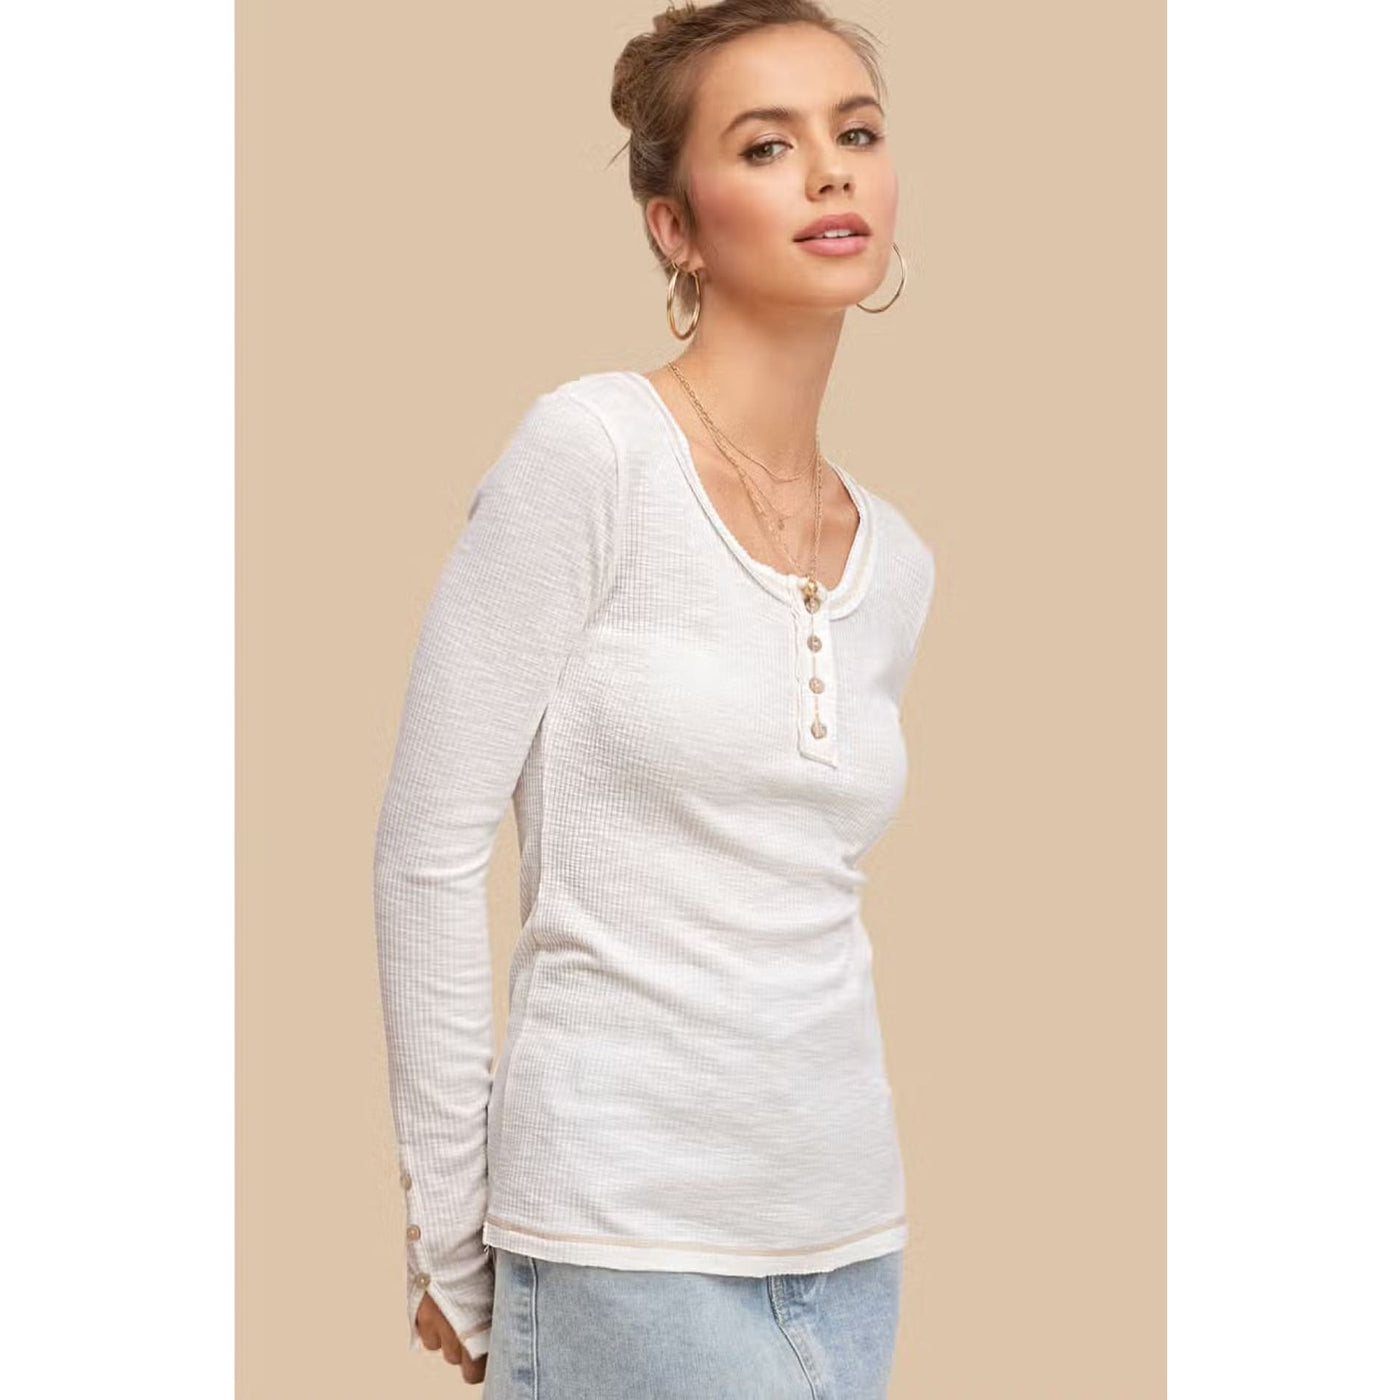 The Leah Top - S / Ivory - 120 Long Sleeve Tops